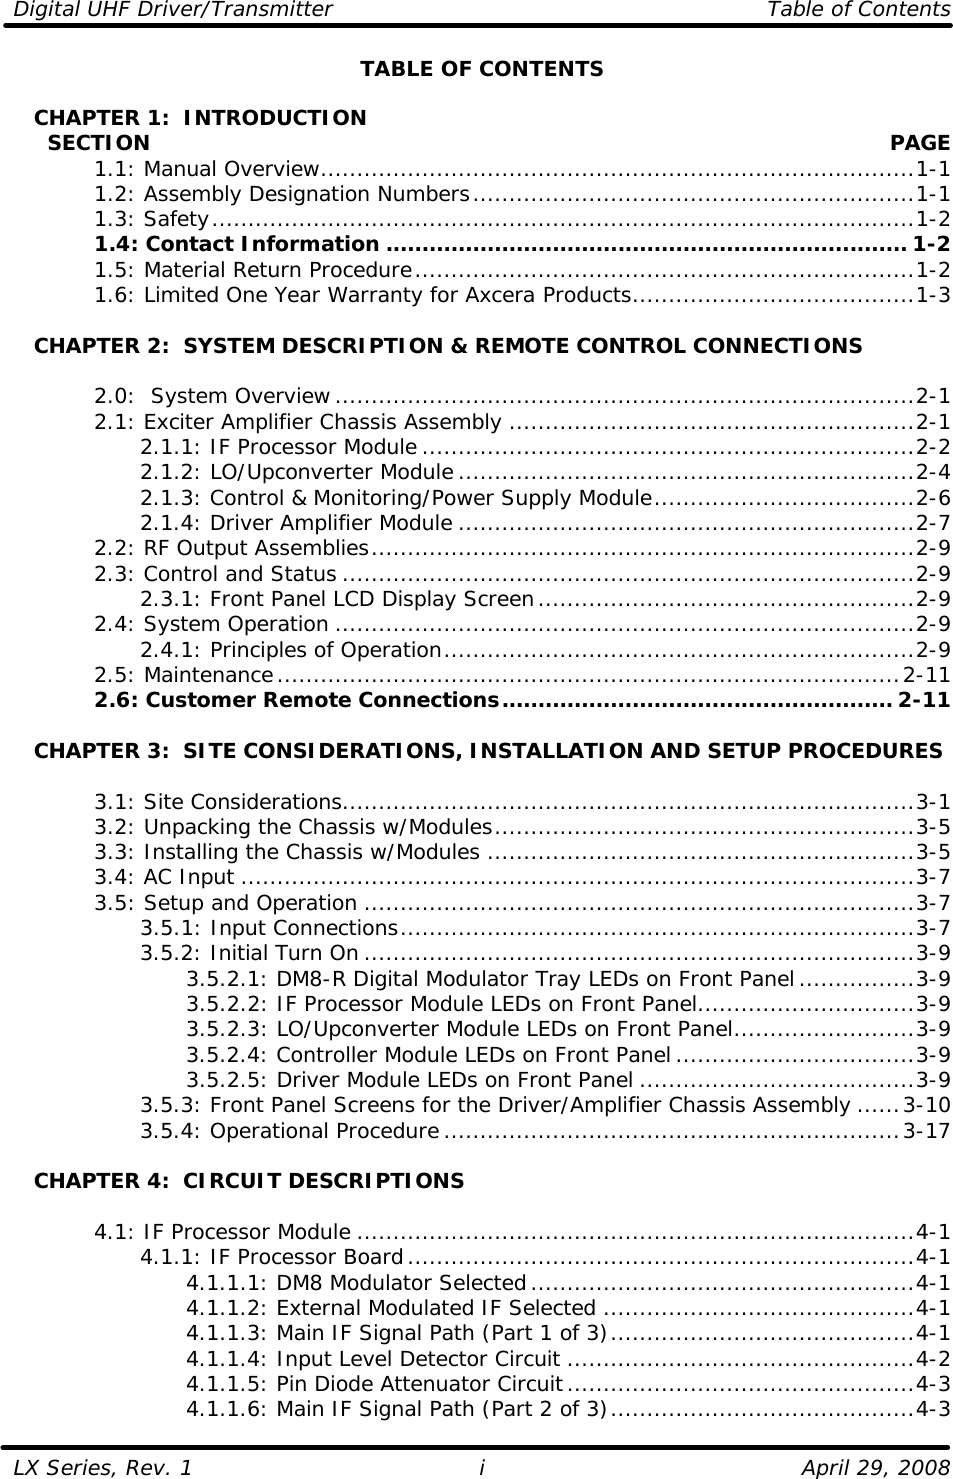 Digital UHF Driver/Transmitter    Table of Contents  LX Series, Rev. 1    April 29, 2008 i TABLE OF CONTENTS     CHAPTER 1:  INTRODUCTION      SECTION    PAGE  1.1: Manual Overview..................................................................................1-1  1.2: Assembly Designation Numbers.............................................................1-1  1.3: Safety.................................................................................................1-2  1.4: Contact Information ........................................................................ 1-2  1.5: Material Return Procedure.....................................................................1-2  1.6: Limited One Year Warranty for Axcera Products.......................................1-3     CHAPTER 2:  SYSTEM DESCRIPTION &amp; REMOTE CONTROL CONNECTIONS   2.0:  System Overview................................................................................2-1  2.1: Exciter Amplifier Chassis Assembly ........................................................2-1     2.1.1: IF Processor Module ....................................................................2-2     2.1.2: LO/Upconverter Module...............................................................2-4     2.1.3: Control &amp; Monitoring/Power Supply Module....................................2-6     2.1.4: Driver Amplifier Module ...............................................................2-7  2.2: RF Output Assemblies...........................................................................2-9  2.3: Control and Status ...............................................................................2-9     2.3.1: Front Panel LCD Display Screen....................................................2-9  2.4: System Operation ................................................................................2-9     2.4.1: Principles of Operation.................................................................2-9  2.5: Maintenance......................................................................................2-11  2.6: Customer Remote Connections...................................................... 2-11         CHAPTER 3:  SITE CONSIDERATIONS, INSTALLATION AND SETUP PROCEDURES     3.1: Site Considerations...............................................................................3-1  3.2: Unpacking the Chassis w/Modules..........................................................3-5  3.3: Installing the Chassis w/Modules ...........................................................3-5  3.4: AC Input .............................................................................................3-7  3.5: Setup and Operation ............................................................................3-7     3.5.1: Input Connections.......................................................................3-7     3.5.2: Initial Turn On ............................................................................3-9     3.5.2.1: DM8-R Digital Modulator Tray LEDs on Front Panel................3-9     3.5.2.2: IF Processor Module LEDs on Front Panel..............................3-9     3.5.2.3: LO/Upconverter Module LEDs on Front Panel.........................3-9     3.5.2.4: Controller Module LEDs on Front Panel.................................3-9     3.5.2.5: Driver Module LEDs on Front Panel ......................................3-9     3.5.3: Front Panel Screens for the Driver/Amplifier Chassis Assembly ......3-10     3.5.4: Operational Procedure...............................................................3-17     CHAPTER 4:  CIRCUIT DESCRIPTIONS   4.1: IF Processor Module .............................................................................4-1     4.1.1: IF Processor Board......................................................................4-1     4.1.1.1: DM8 Modulator Selected.....................................................4-1     4.1.1.2: External Modulated IF Selected ...........................................4-1     4.1.1.3: Main IF Signal Path (Part 1 of 3)..........................................4-1     4.1.1.4: Input Level Detector Circuit ................................................4-2     4.1.1.5: Pin Diode Attenuator Circuit................................................4-3     4.1.1.6: Main IF Signal Path (Part 2 of 3)..........................................4-3 